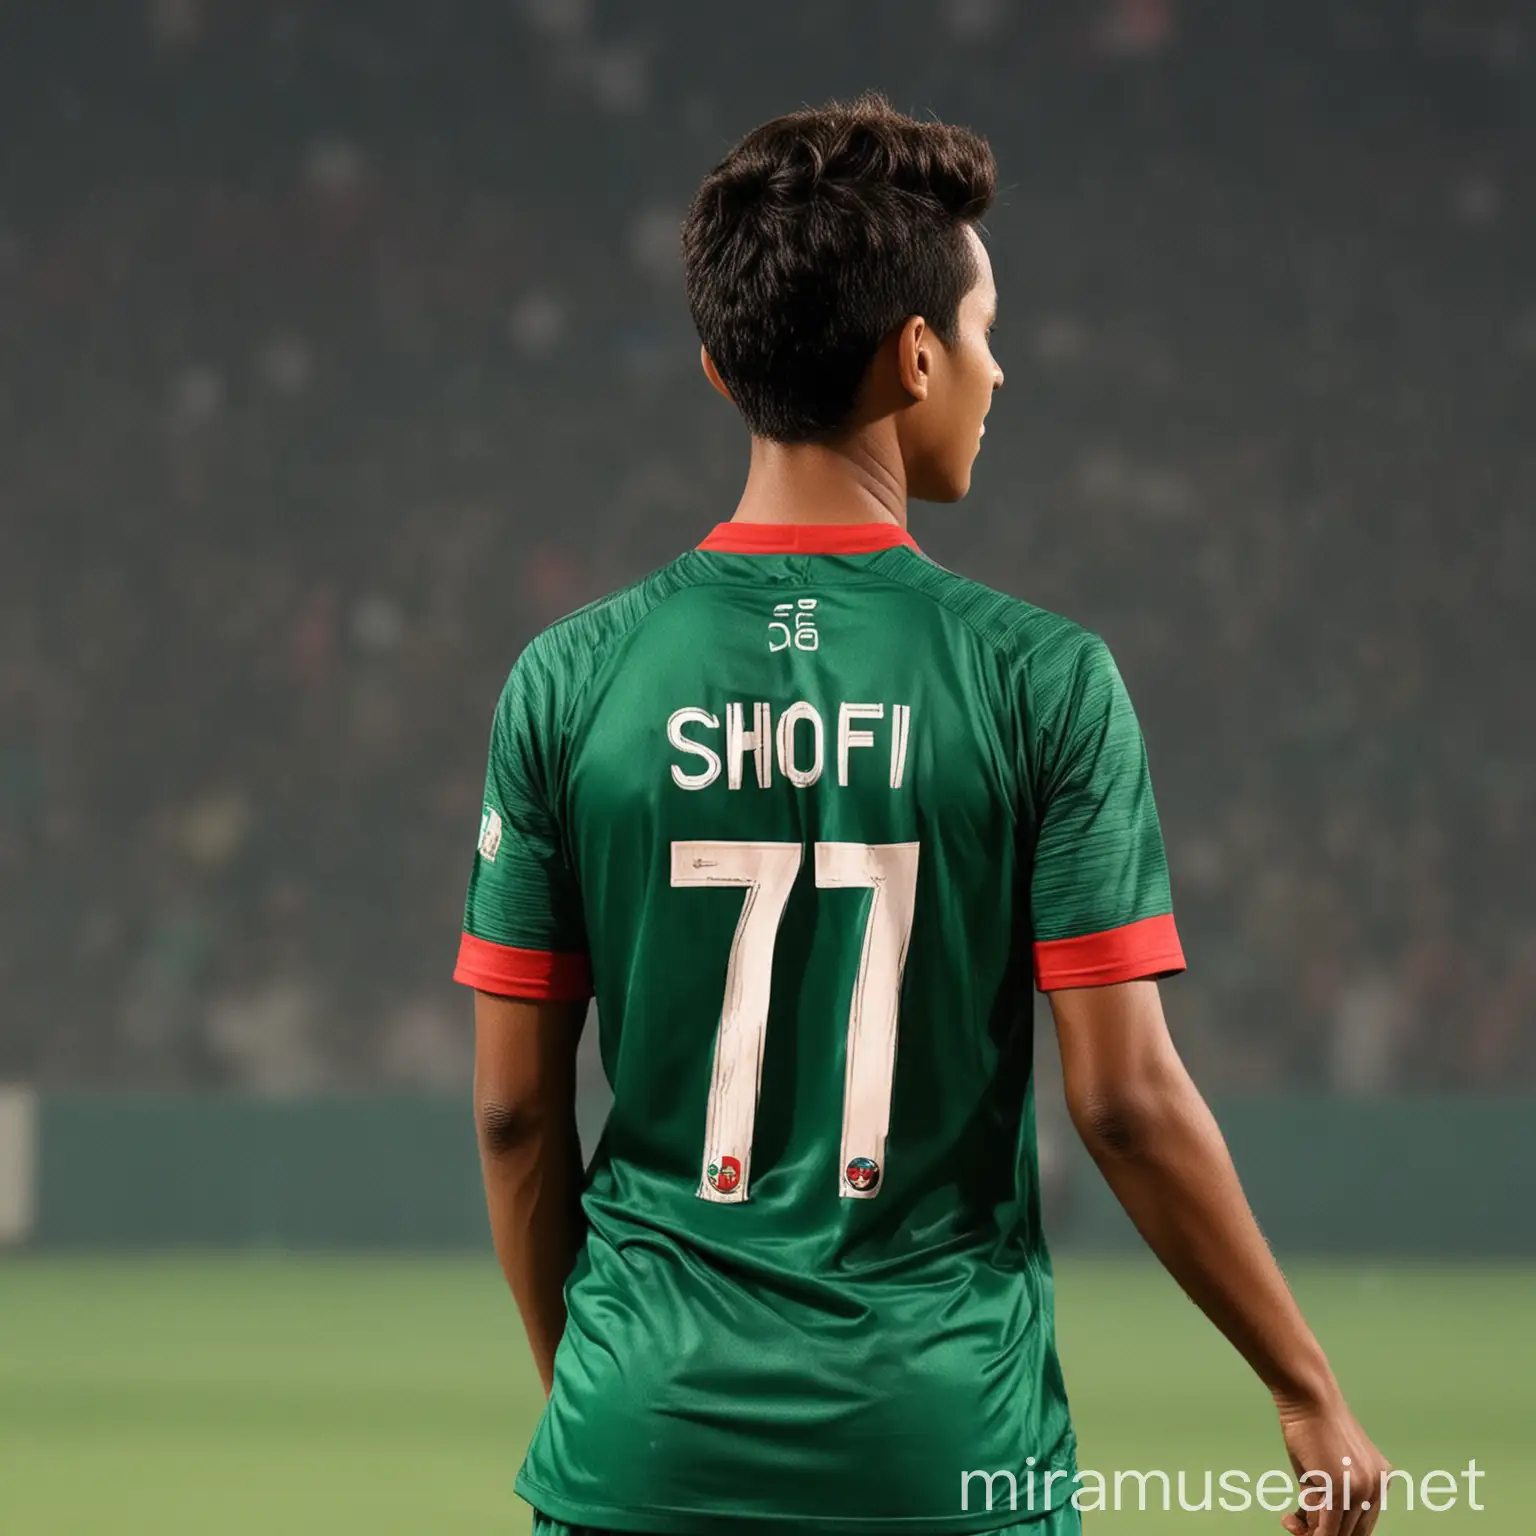 /Imagine a boy's back with bangladesh jersy and his jersy number is 77 and name is shofi and he showing his back and his name is shofi